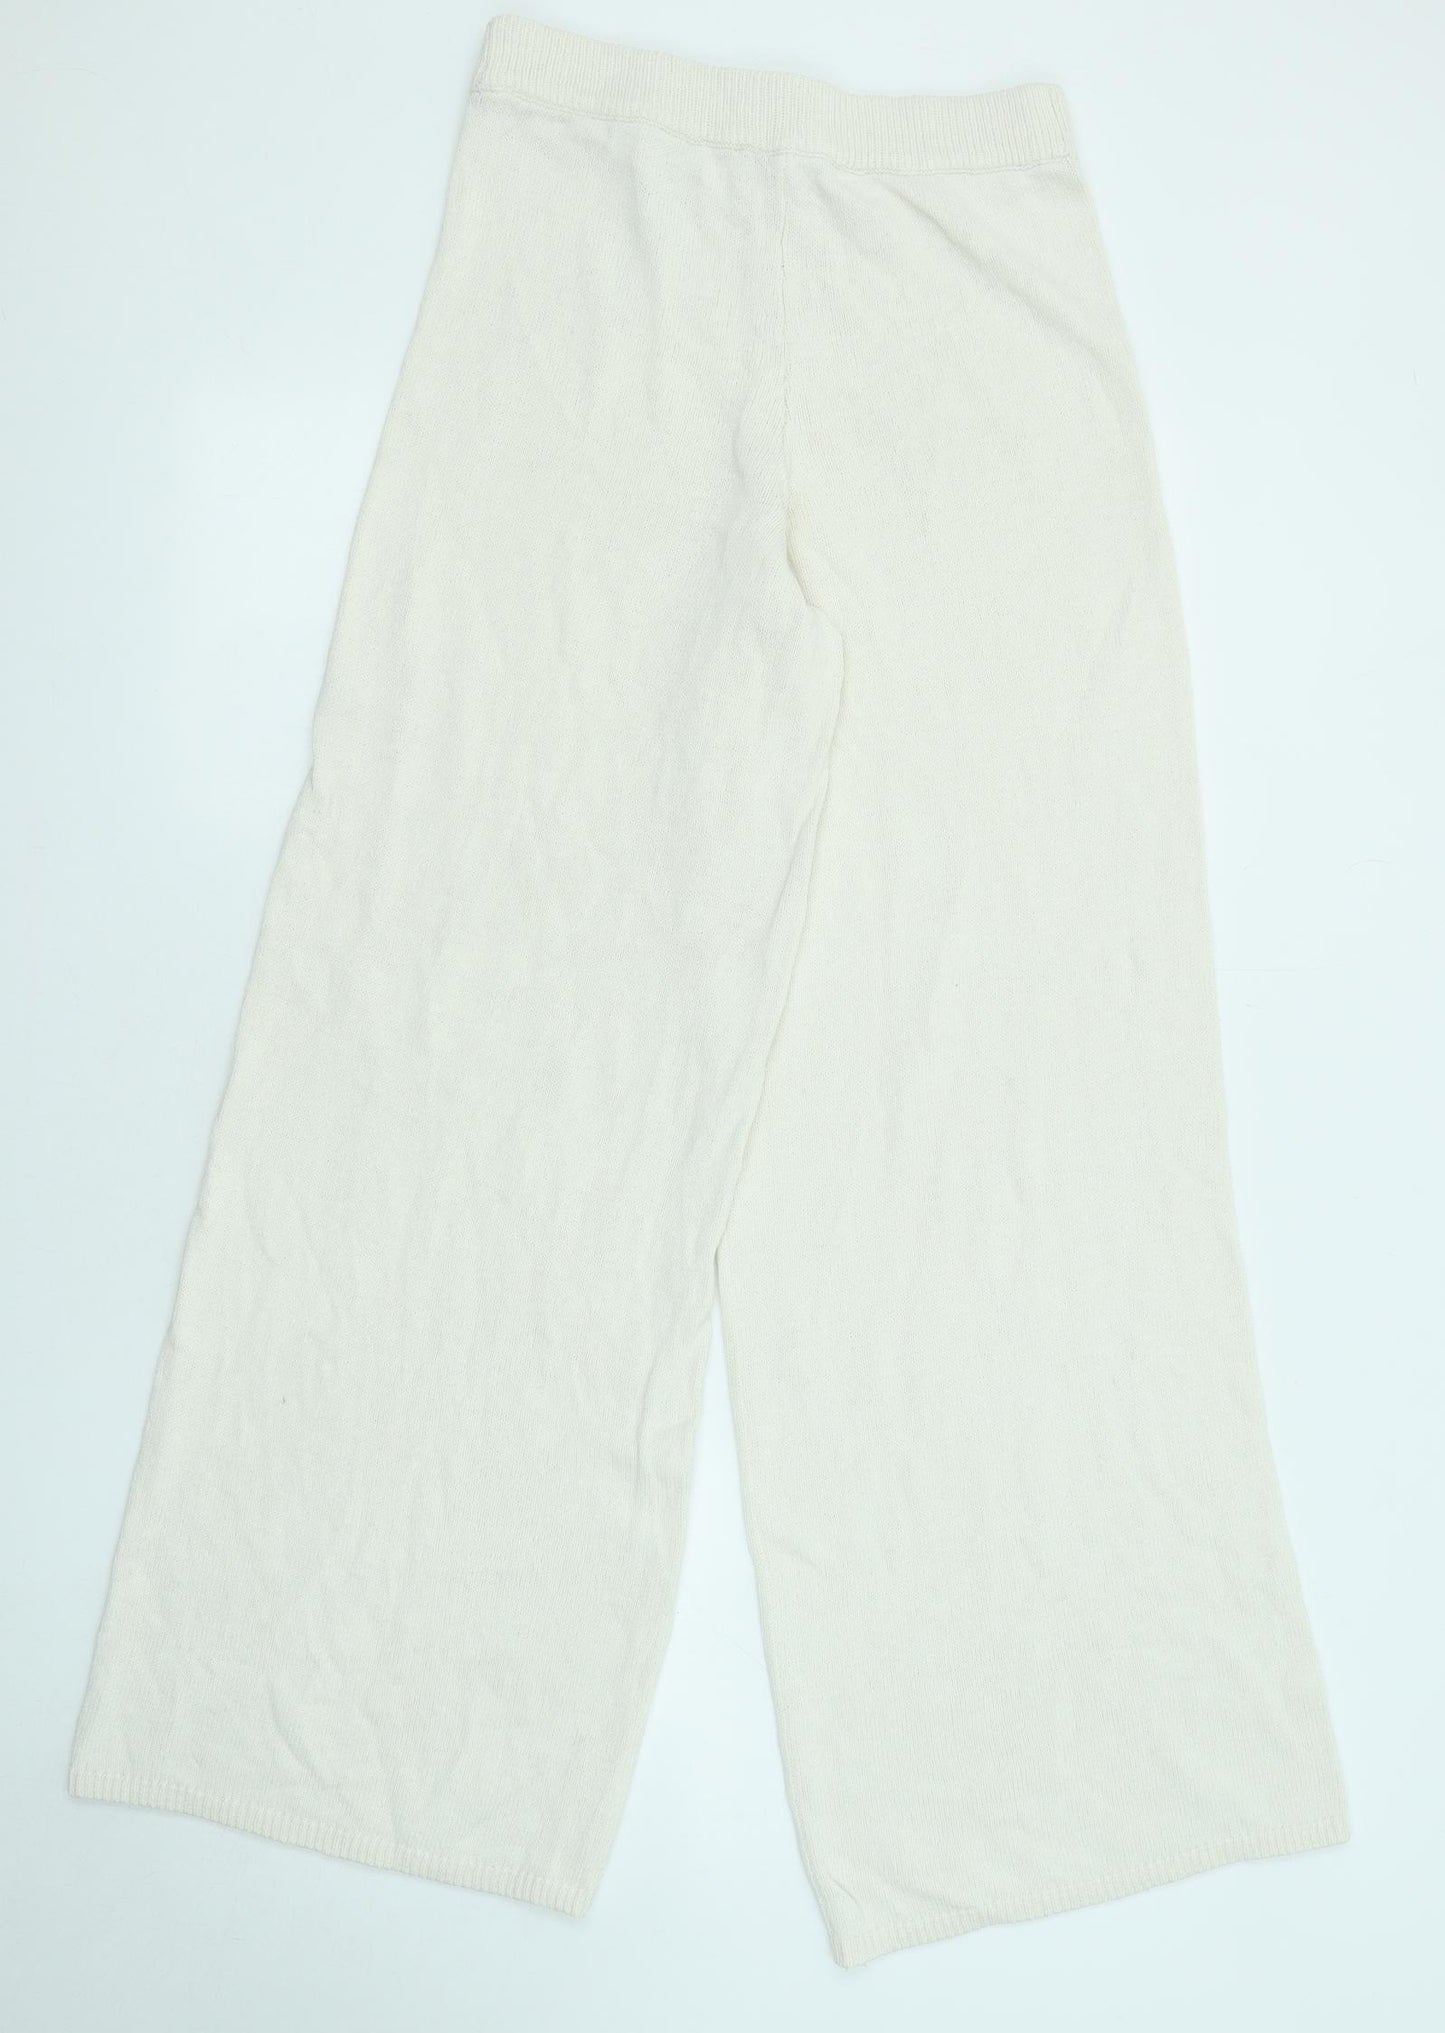 Zara Womens Ivory Cotton Jogger Trousers Size M L31 in Regular